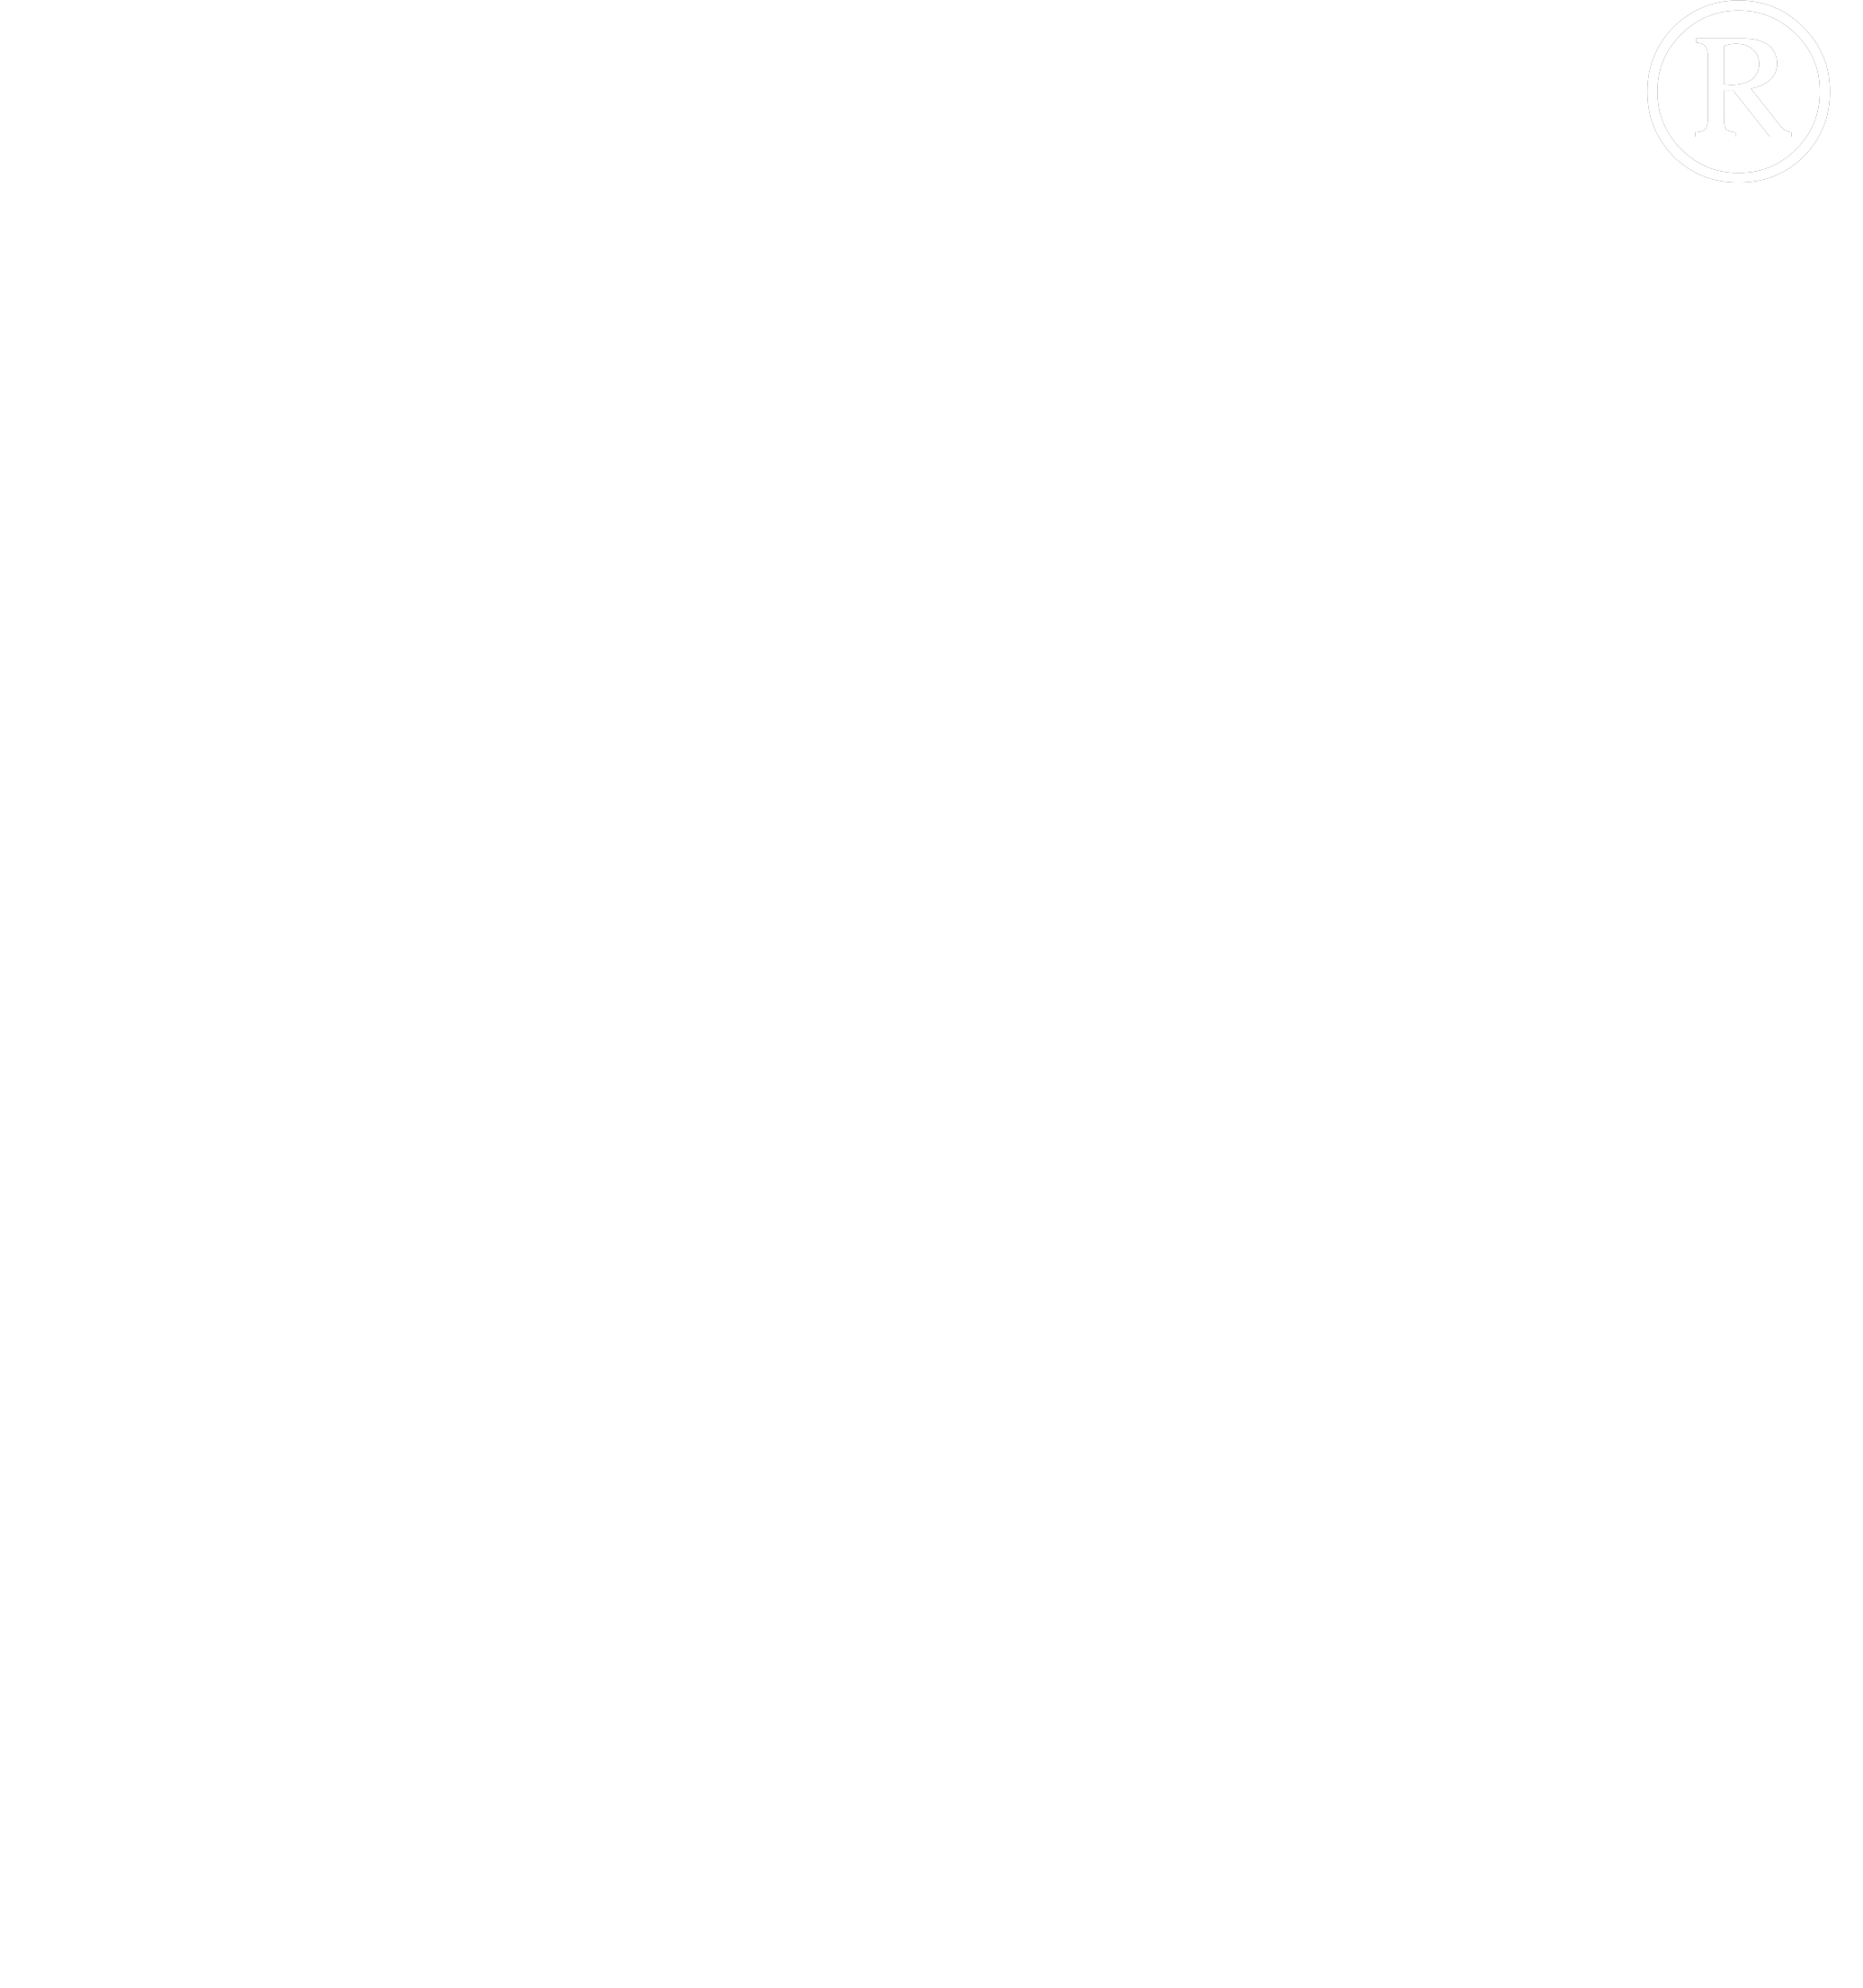 The best in Poland